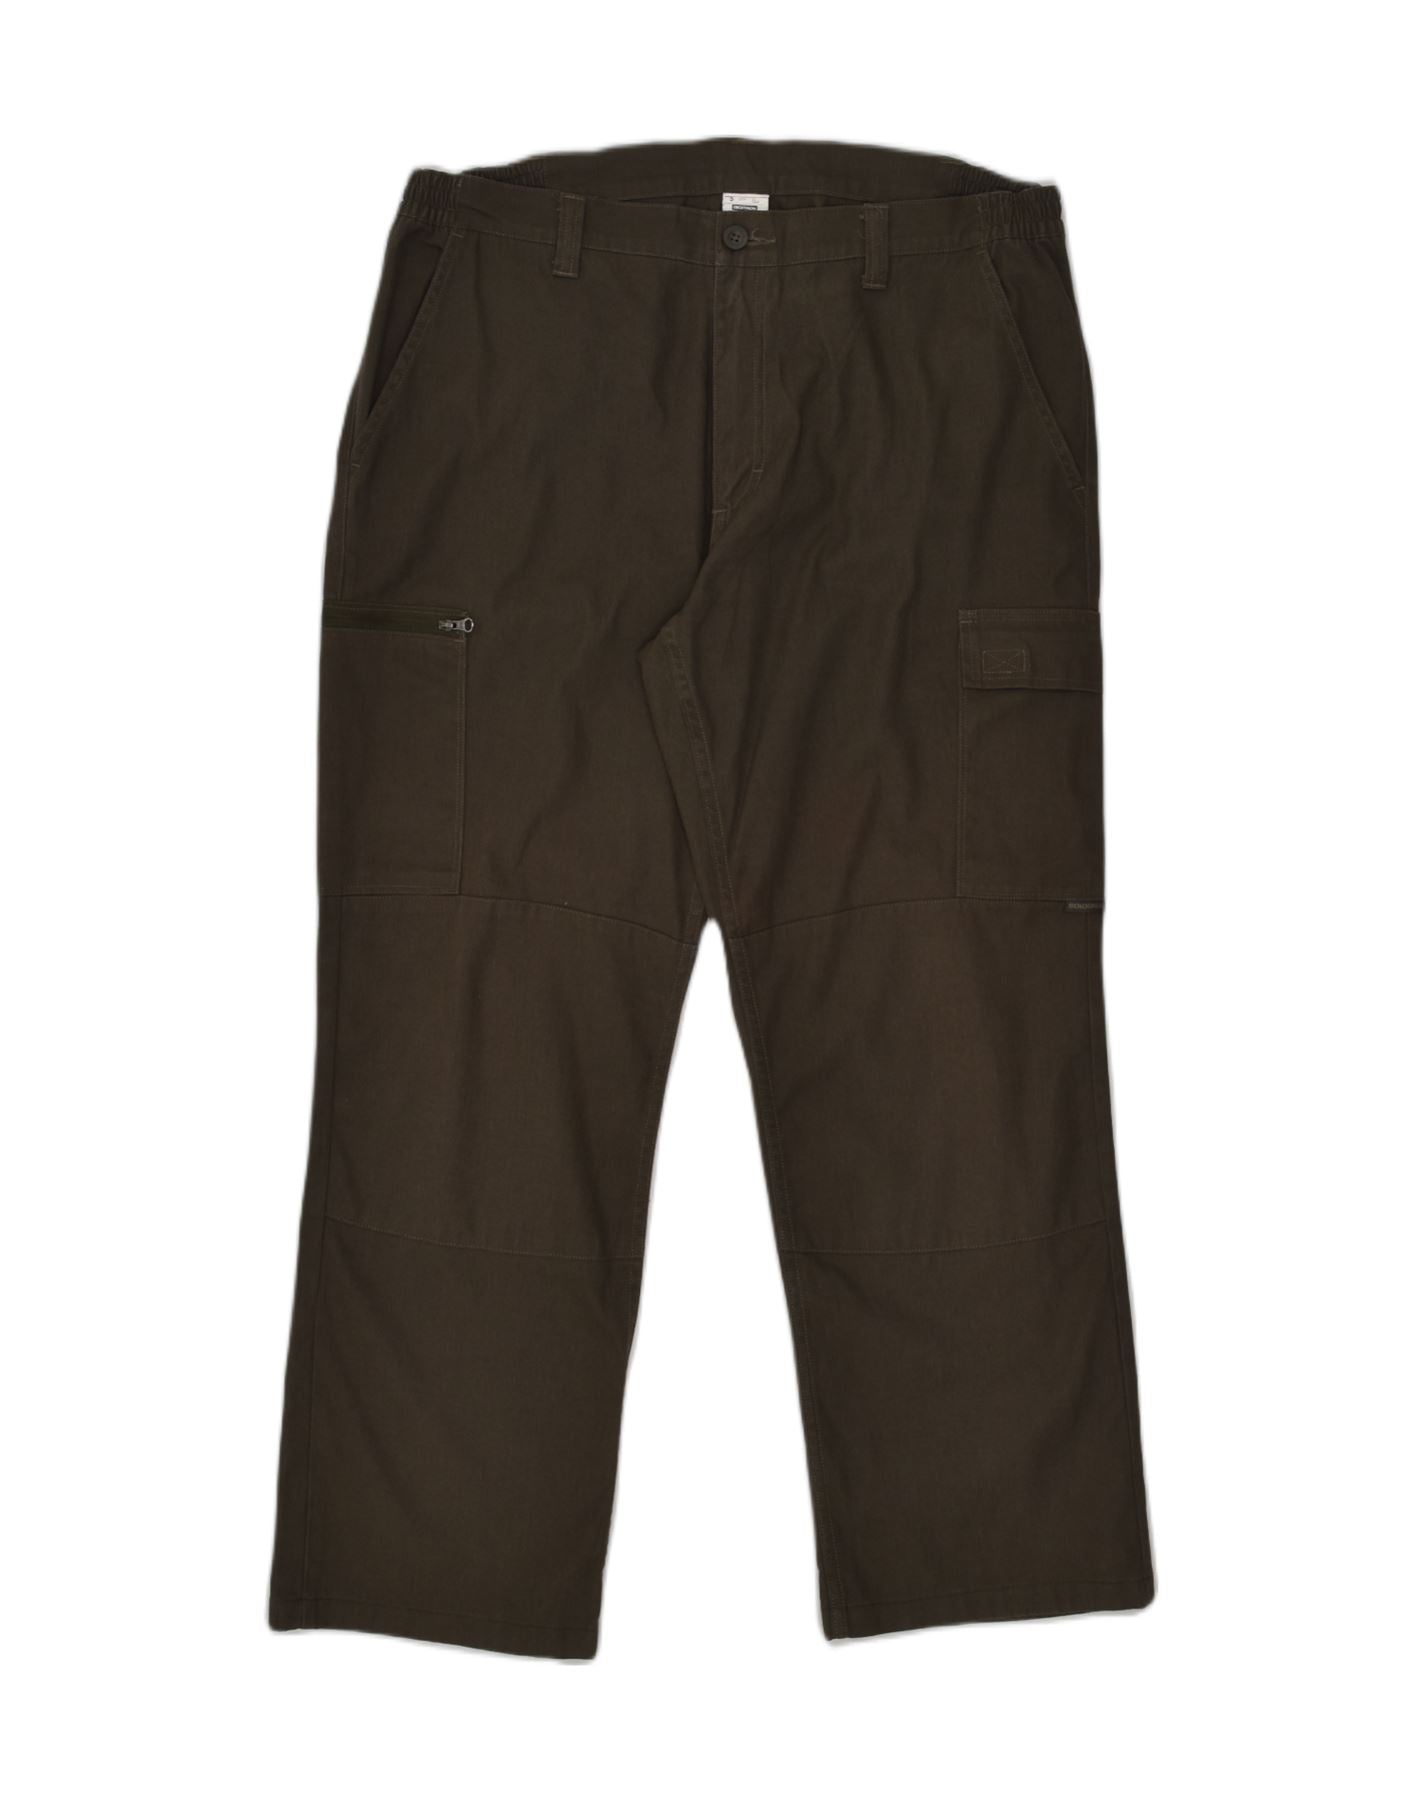 Men Resistant Cargo Trousers Pants Steppe 320 - Green/Brown